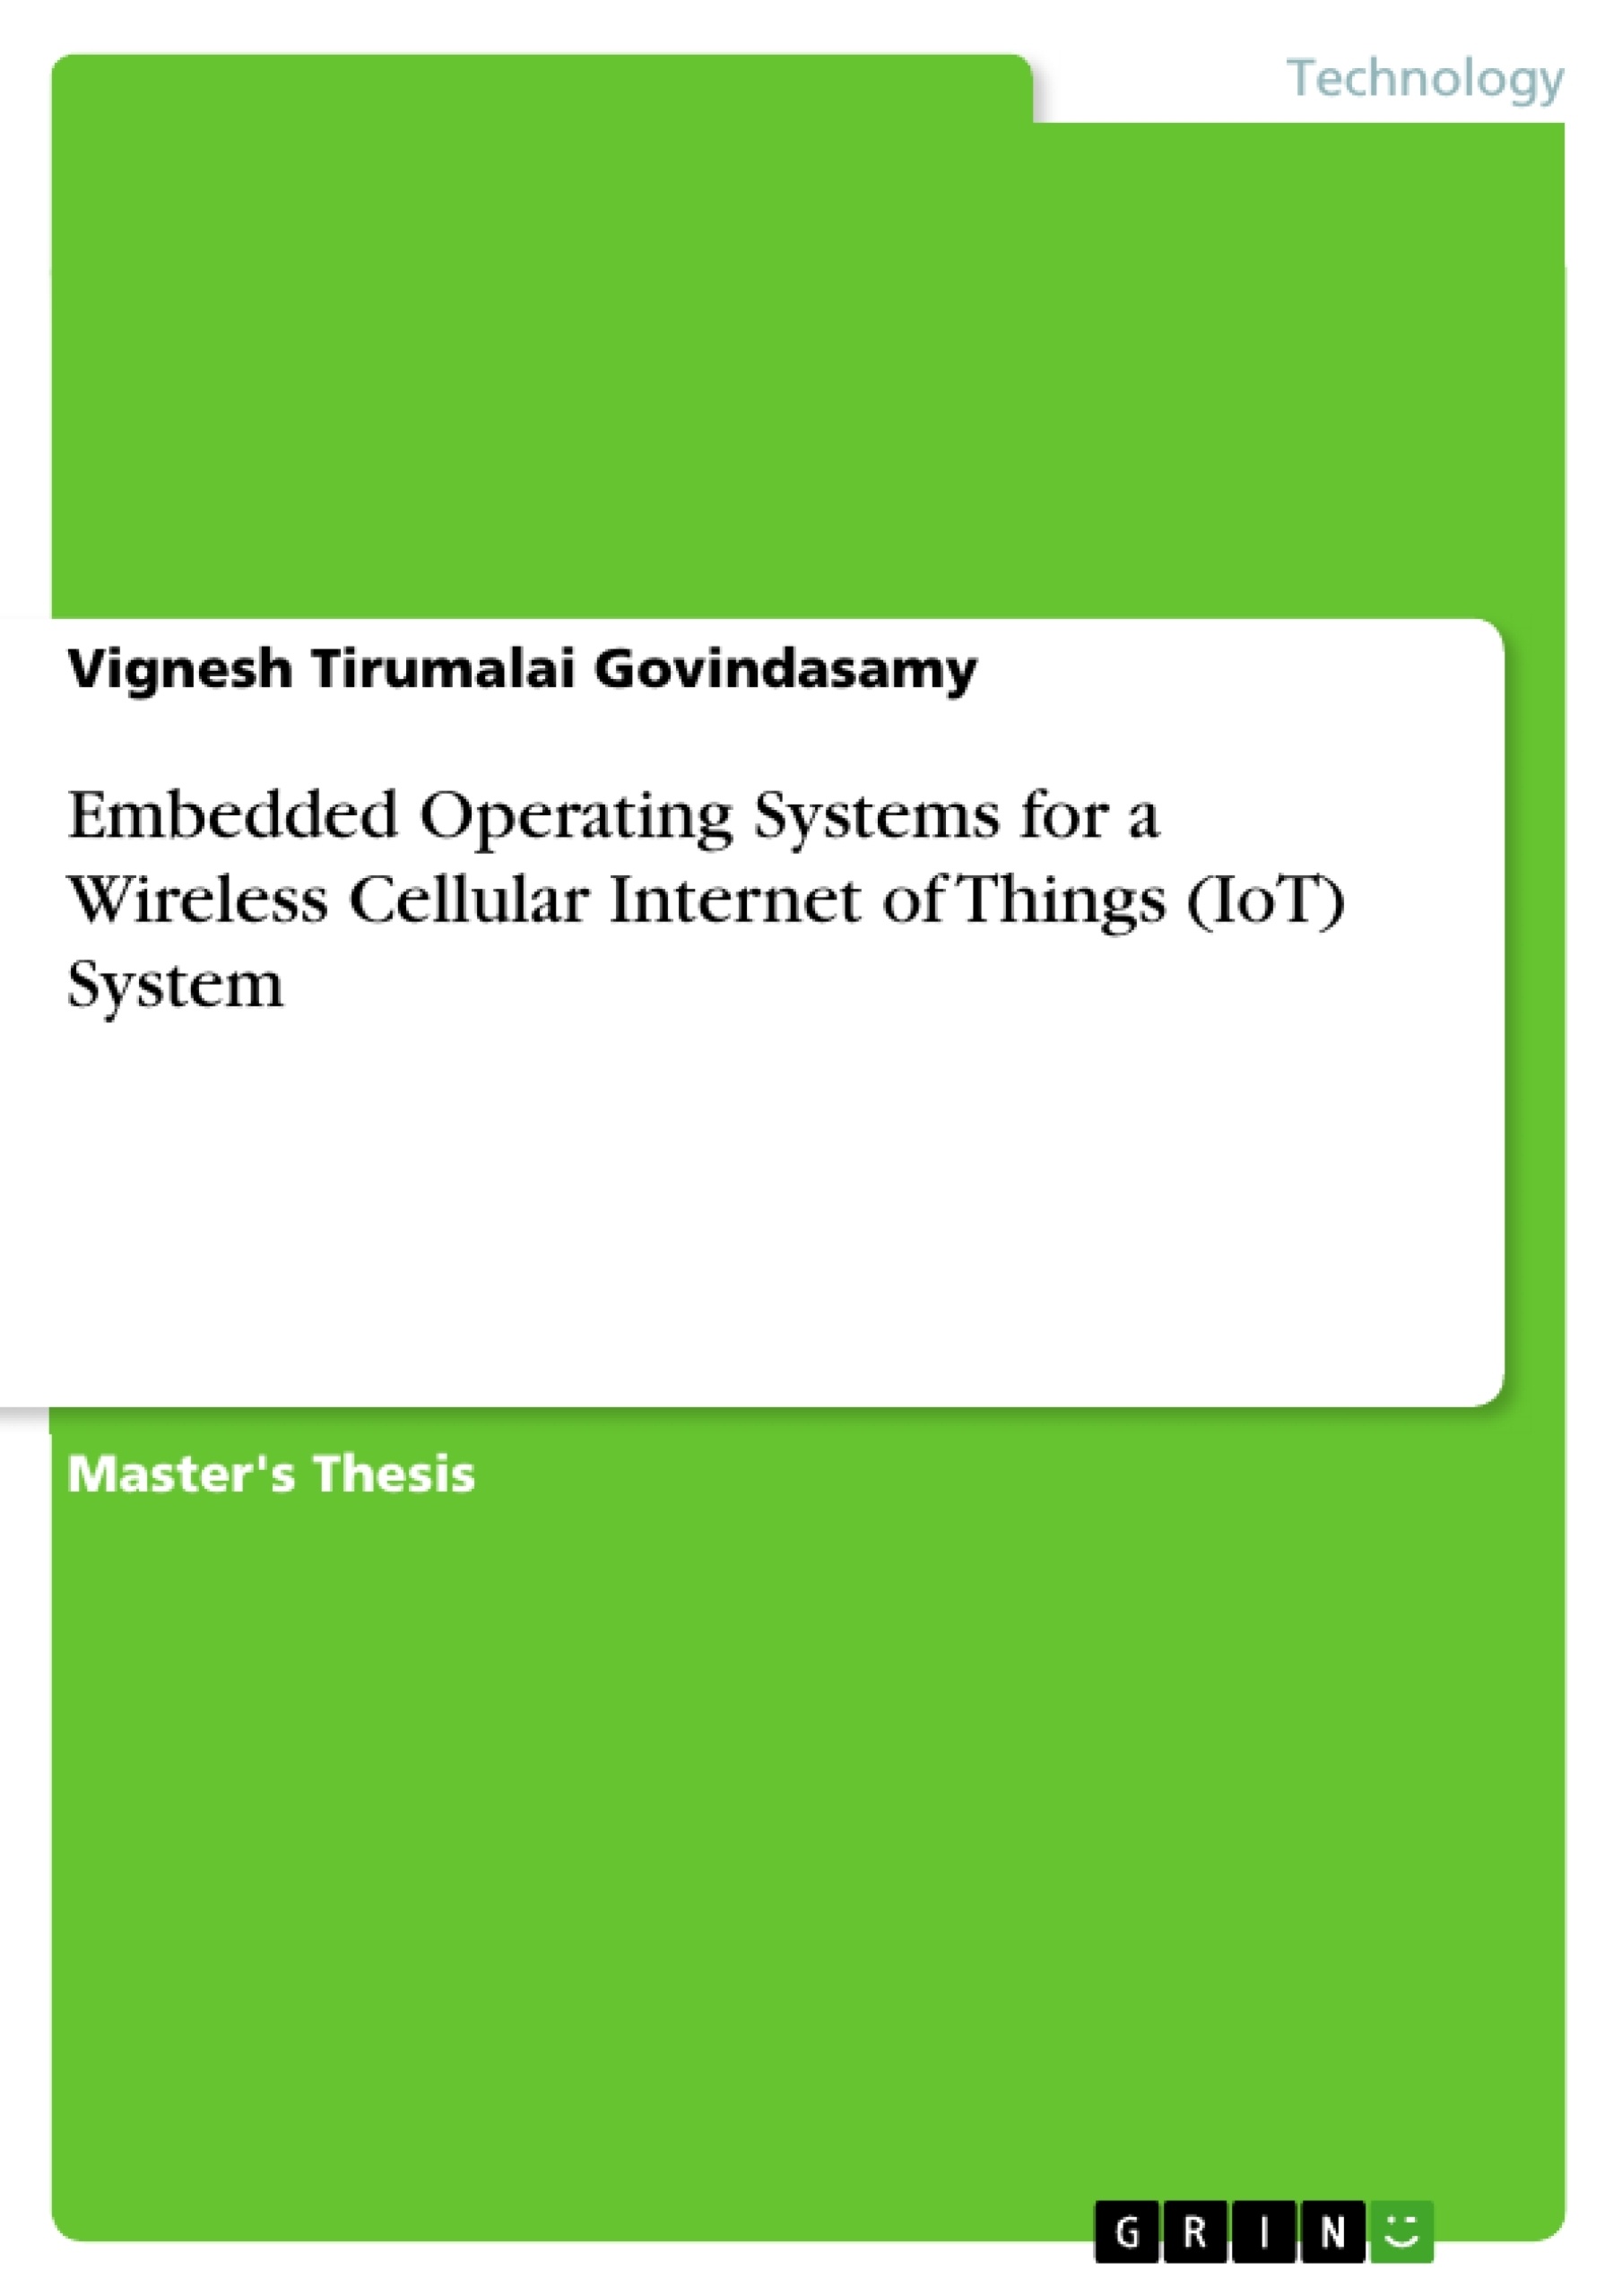 Titre: Embedded Operating Systems for a Wireless Cellular Internet of Things (IoT) System